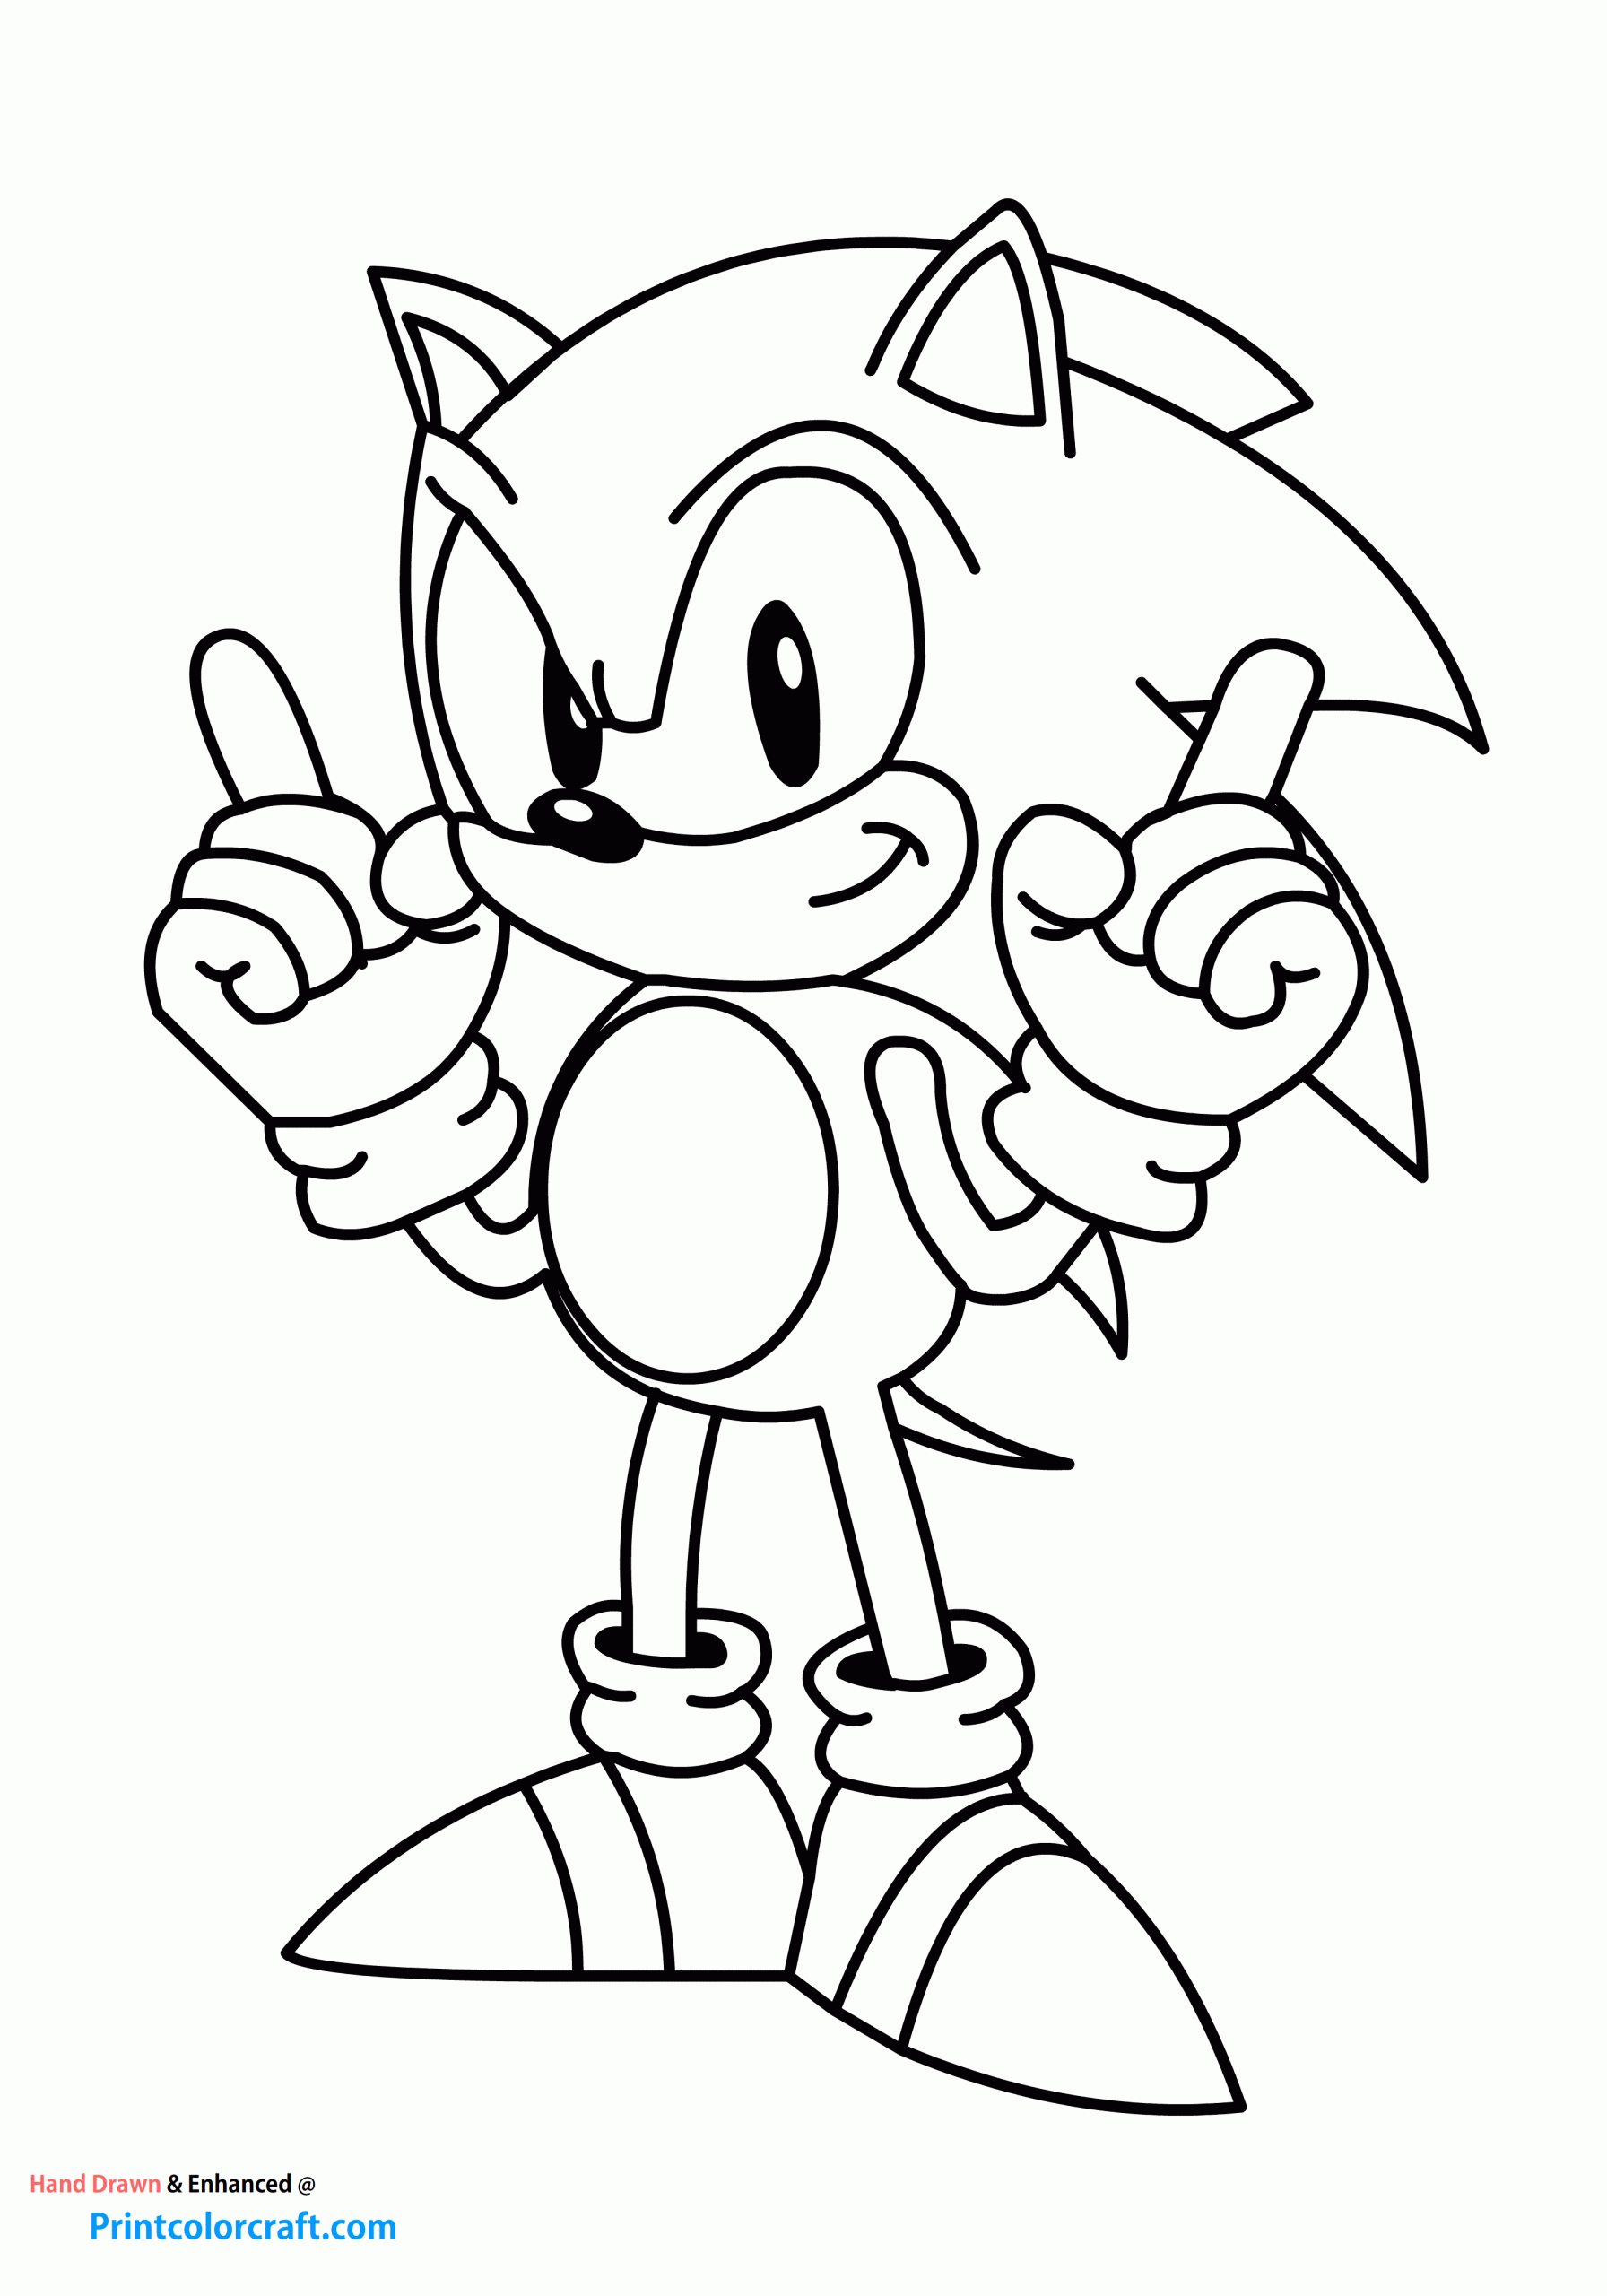 Hyper Sonic The Hedgehog Coloring Pages Coloring Pages